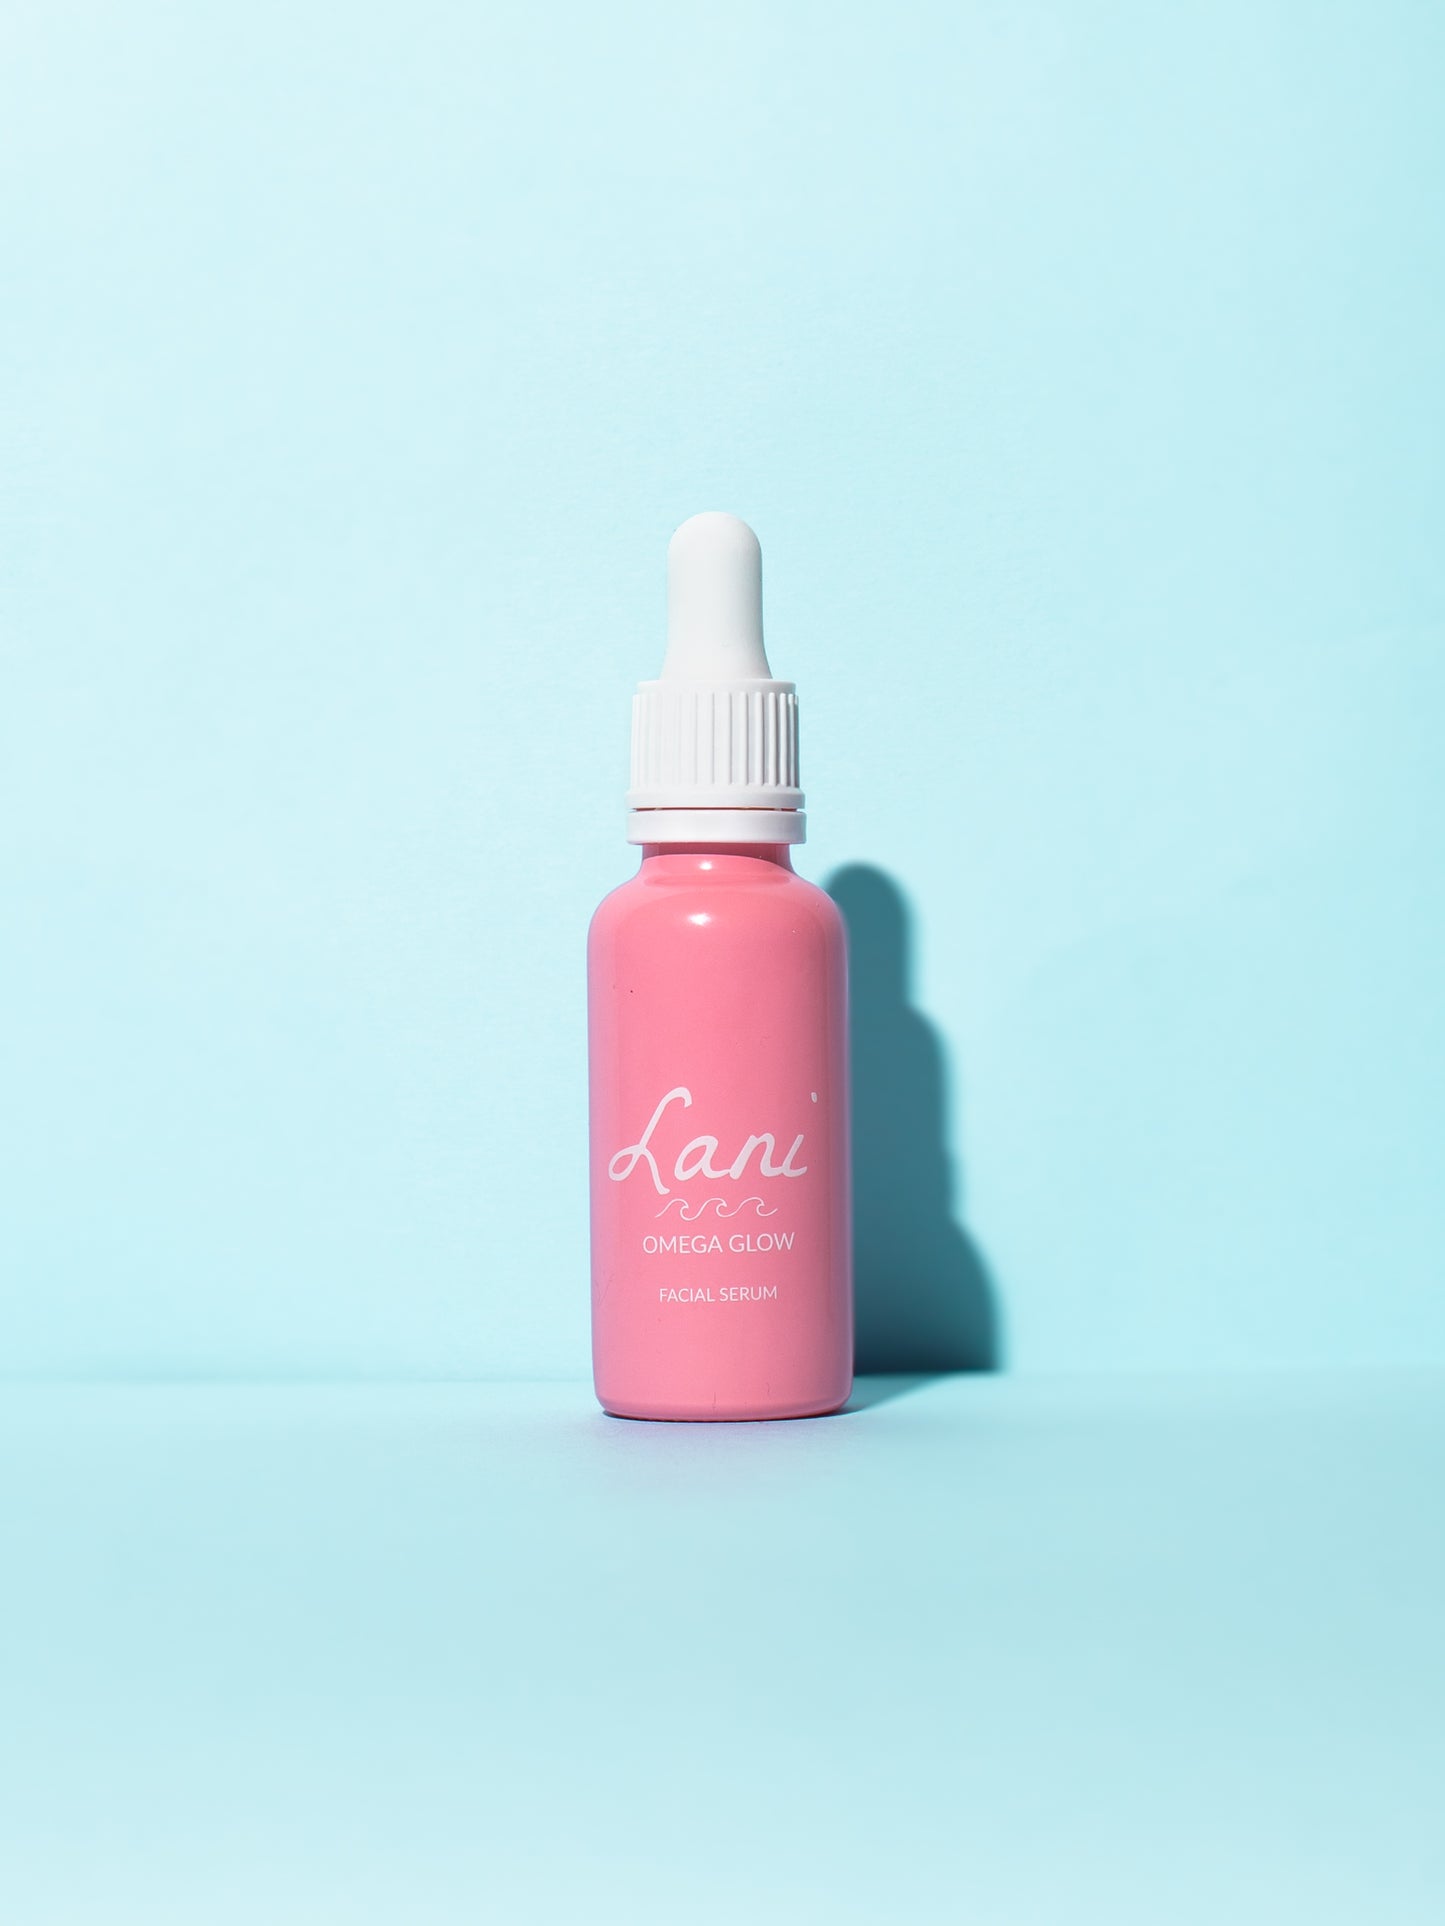 Lani Tropical Omega Glow Serum | helps skin retain moisture, maintain elasticity, balance oil production | Cruelty Free | Natural | Ethical | Low Waste